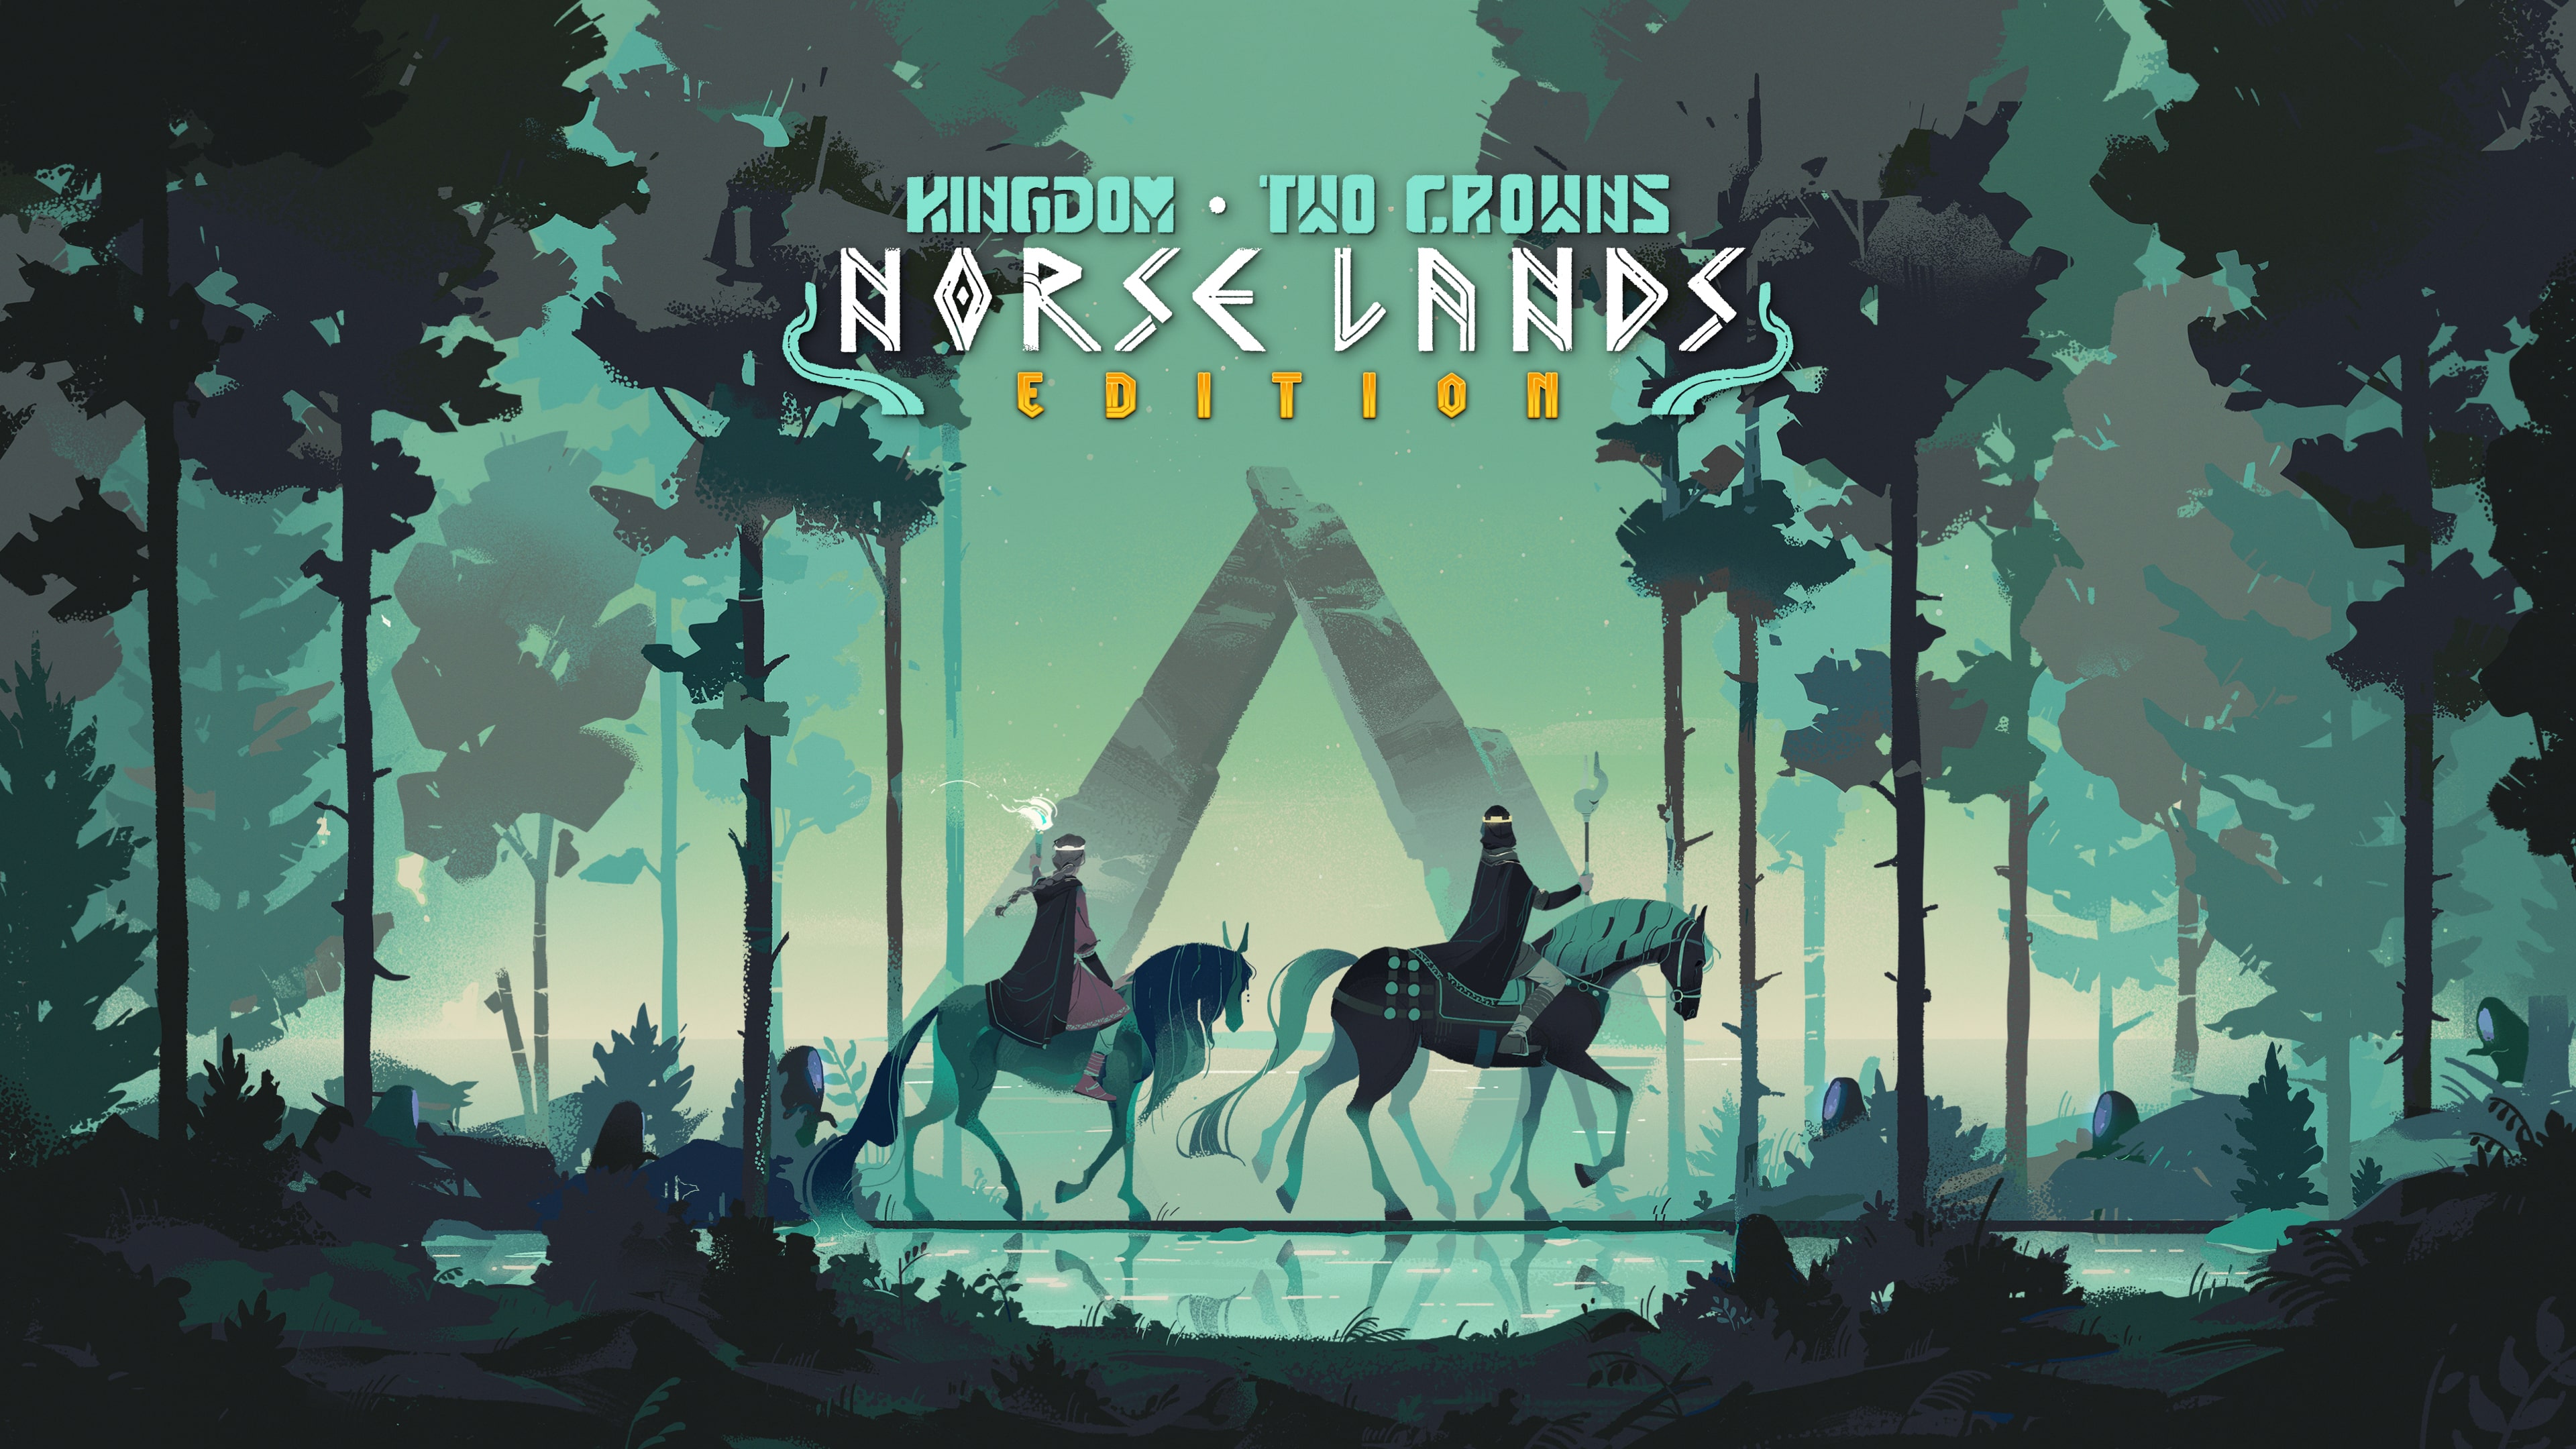 Norse Lands Edition